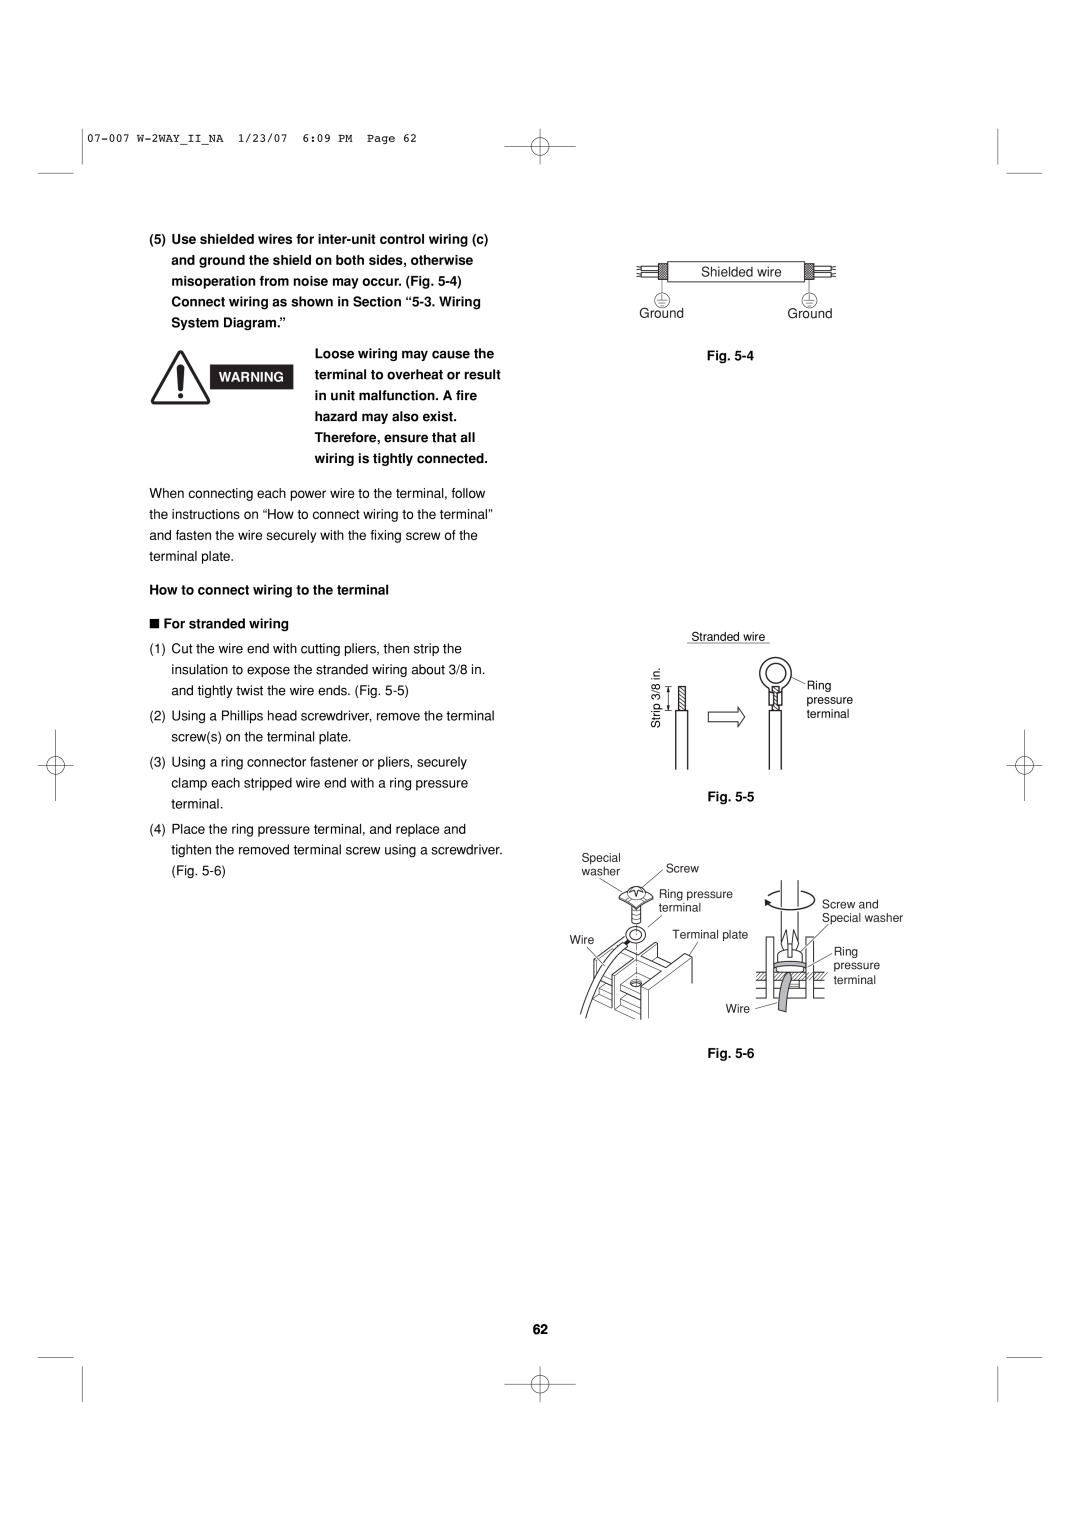 Sanyo 85464359982001 installation instructions How to connect wiring to the terminal, Shielded wire GroundGround 